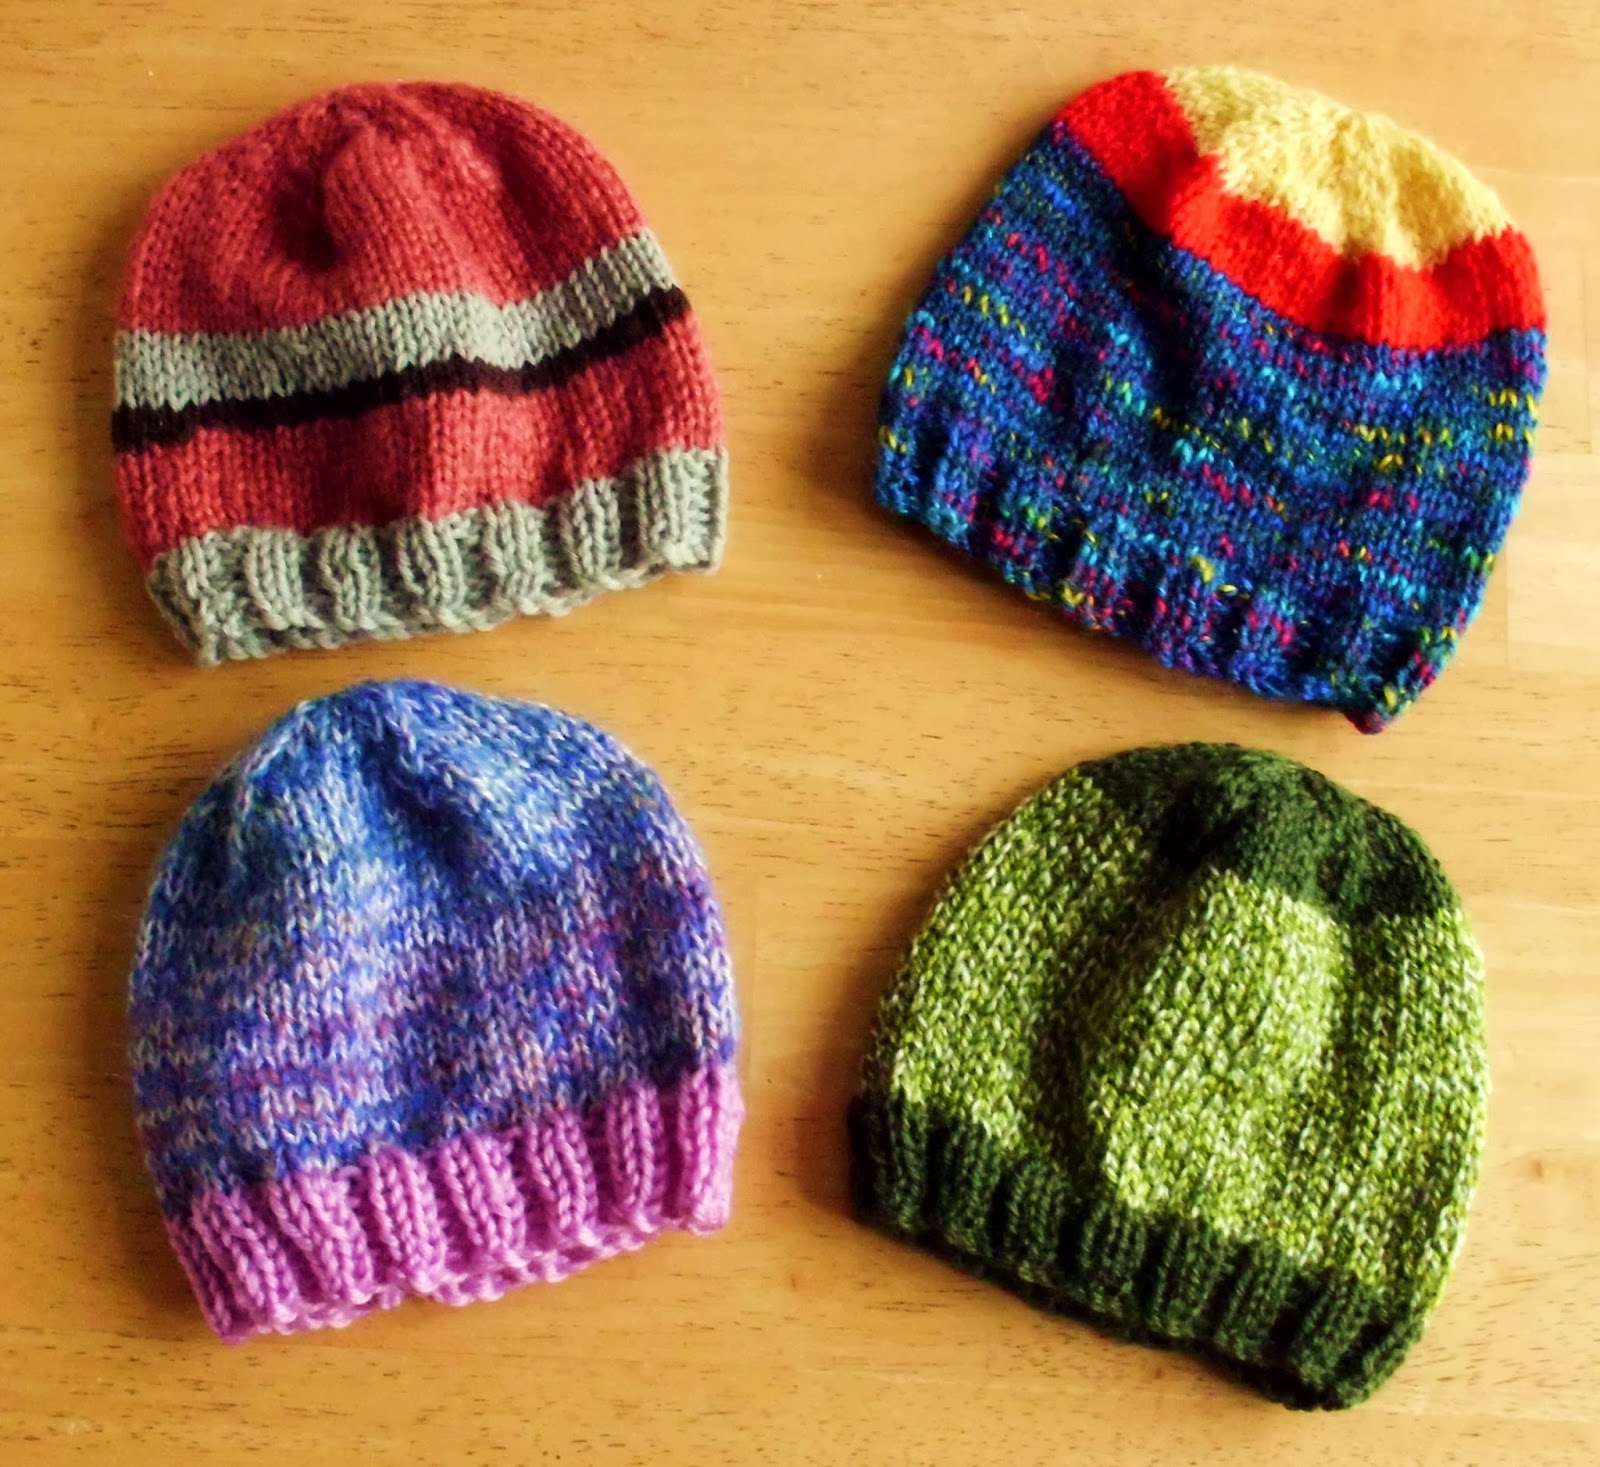 Great Balls of Wool: More baby hats...